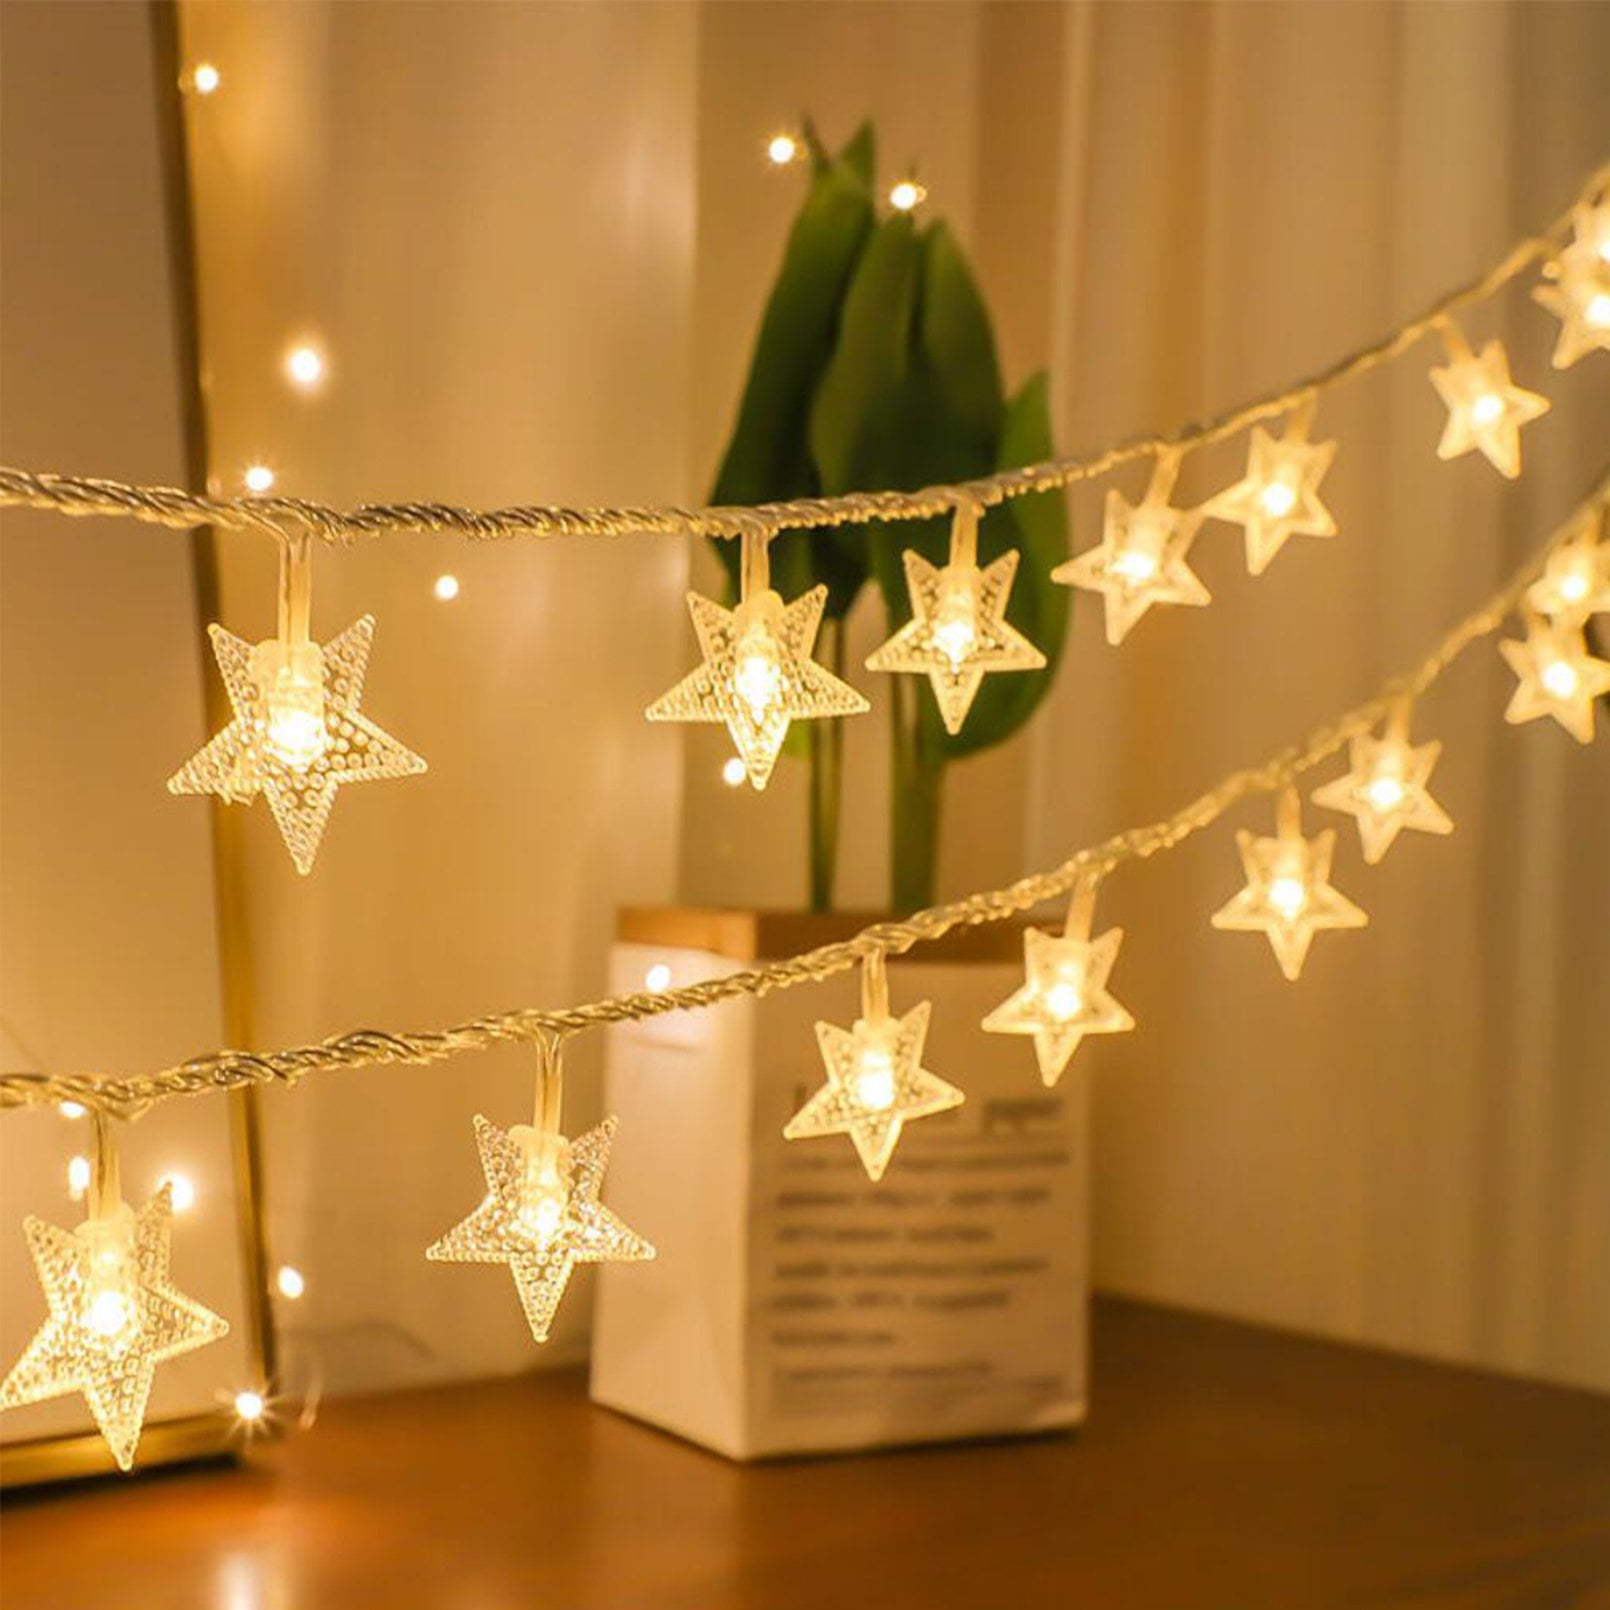 LED Star Lights Curtain Star String Fairy Lights Micro Copper Wire Party Decor 